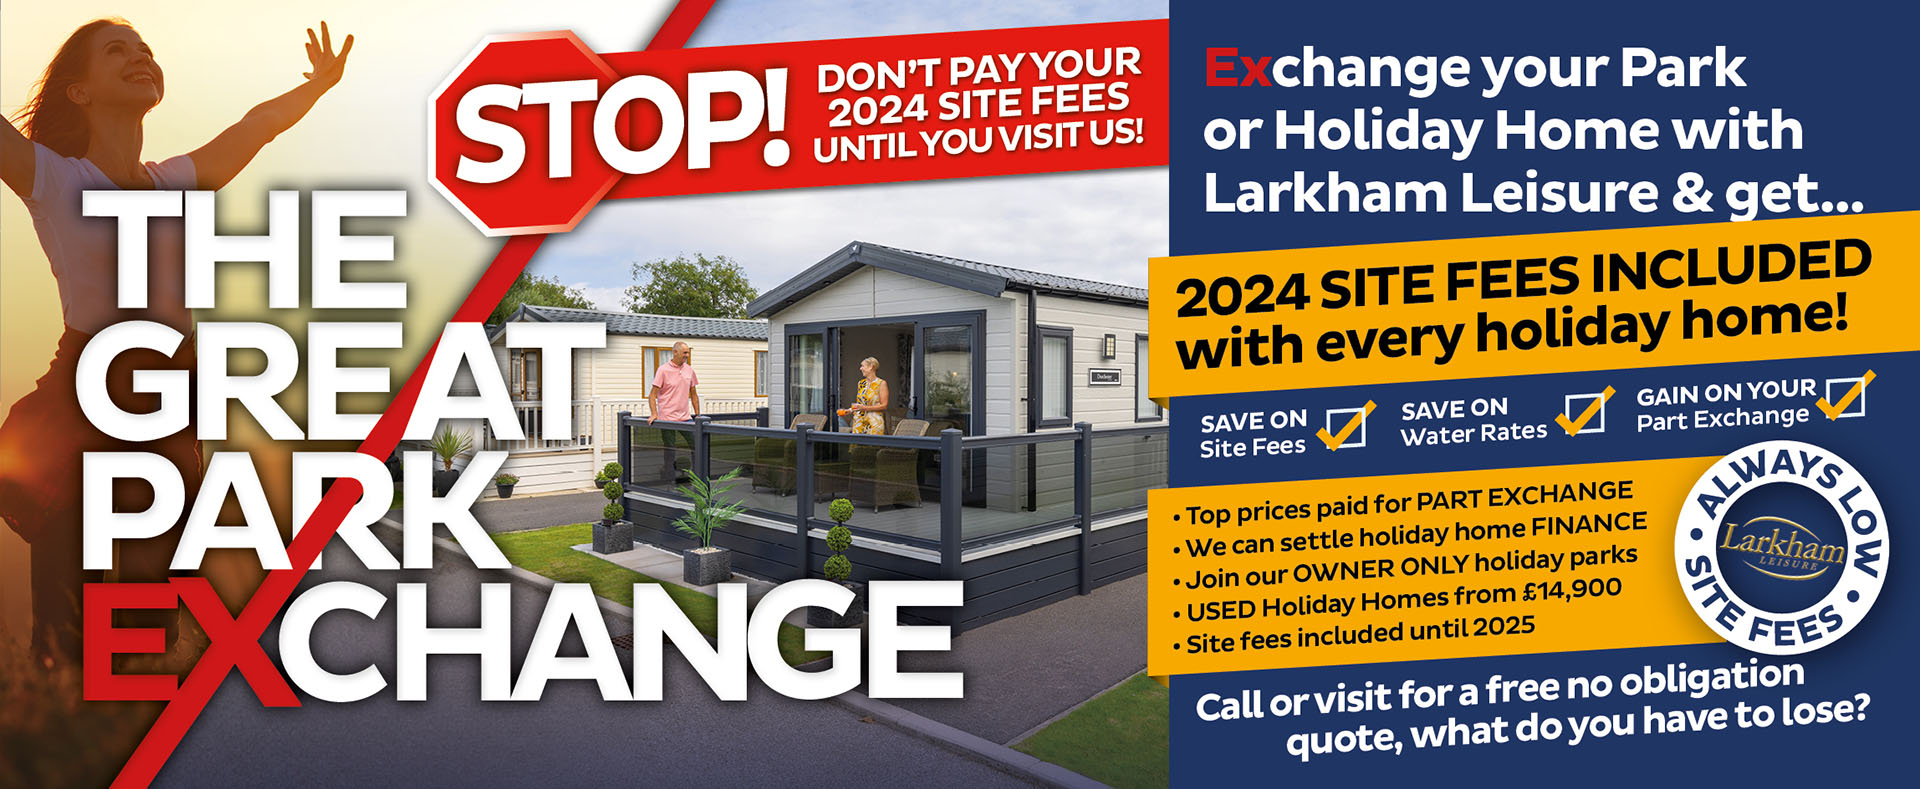 Exchange your park of holiday home with Larkham Leisure and get 2024 site fees included with every holiday home.